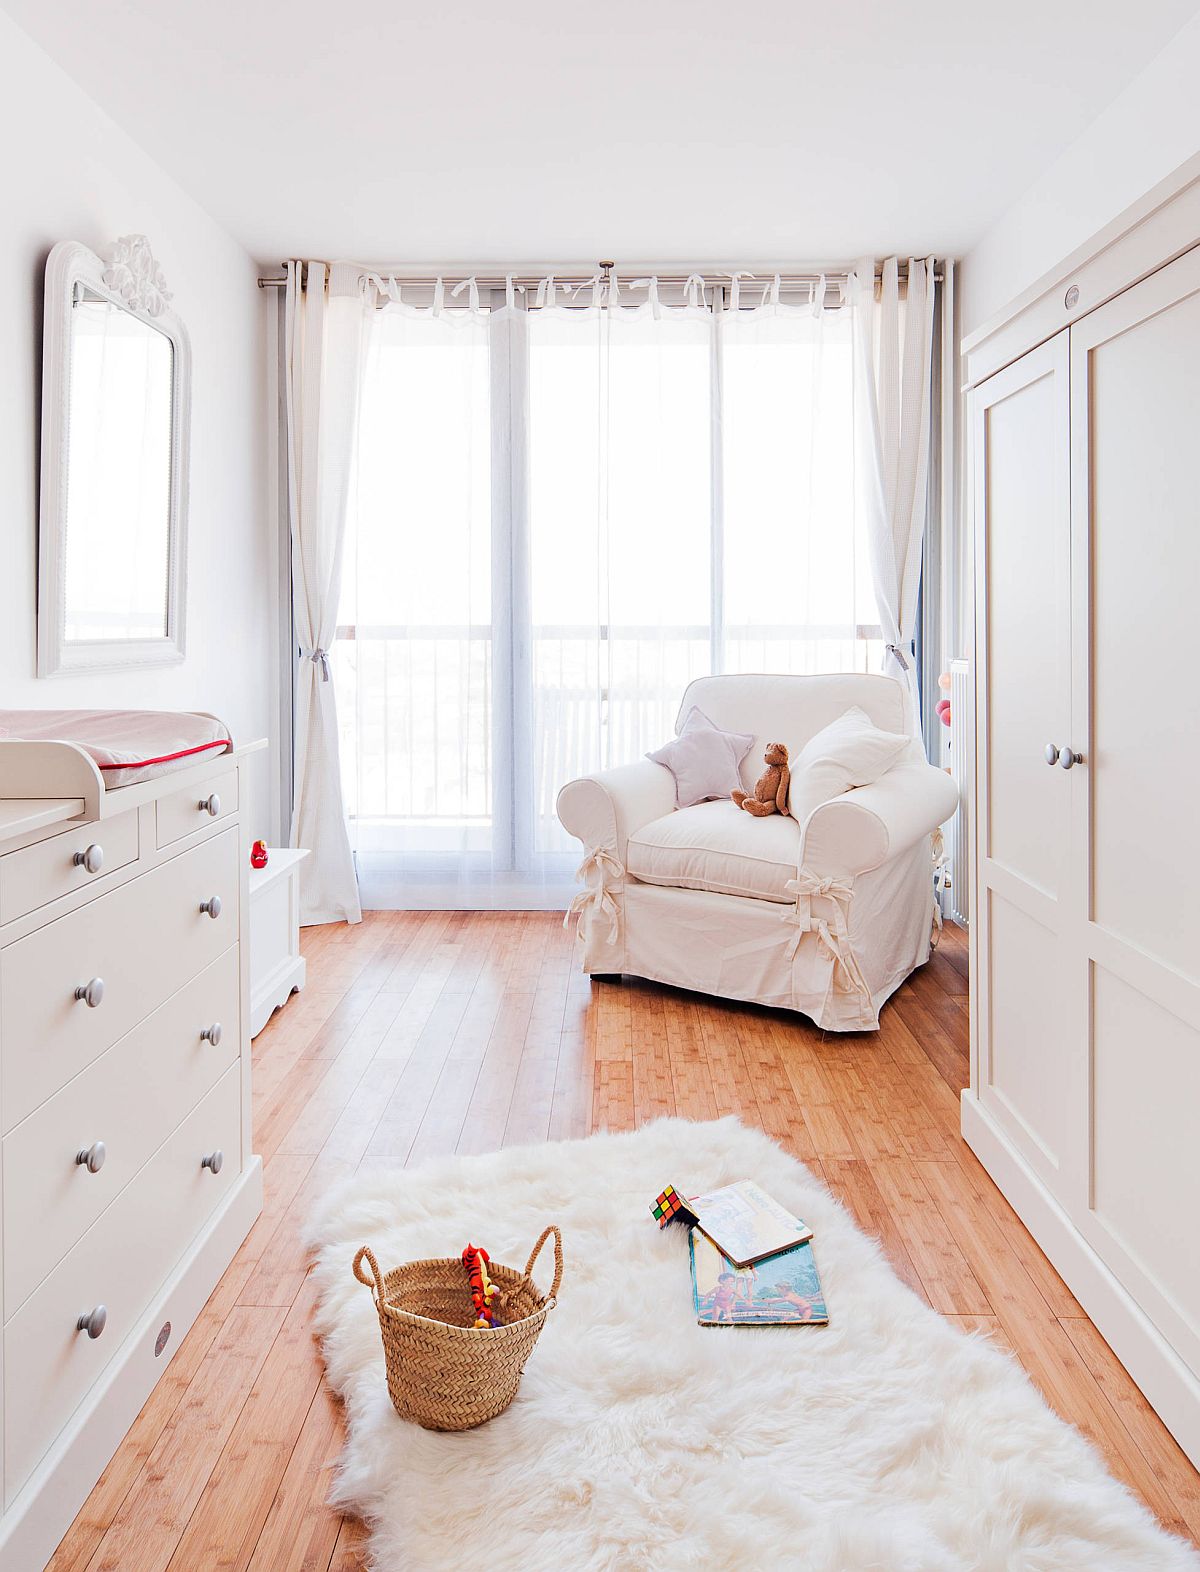 Dash-of-Parisian-charm-finds-its-way-into-this-wood-and-white-farmhouse-style-nursery-84757